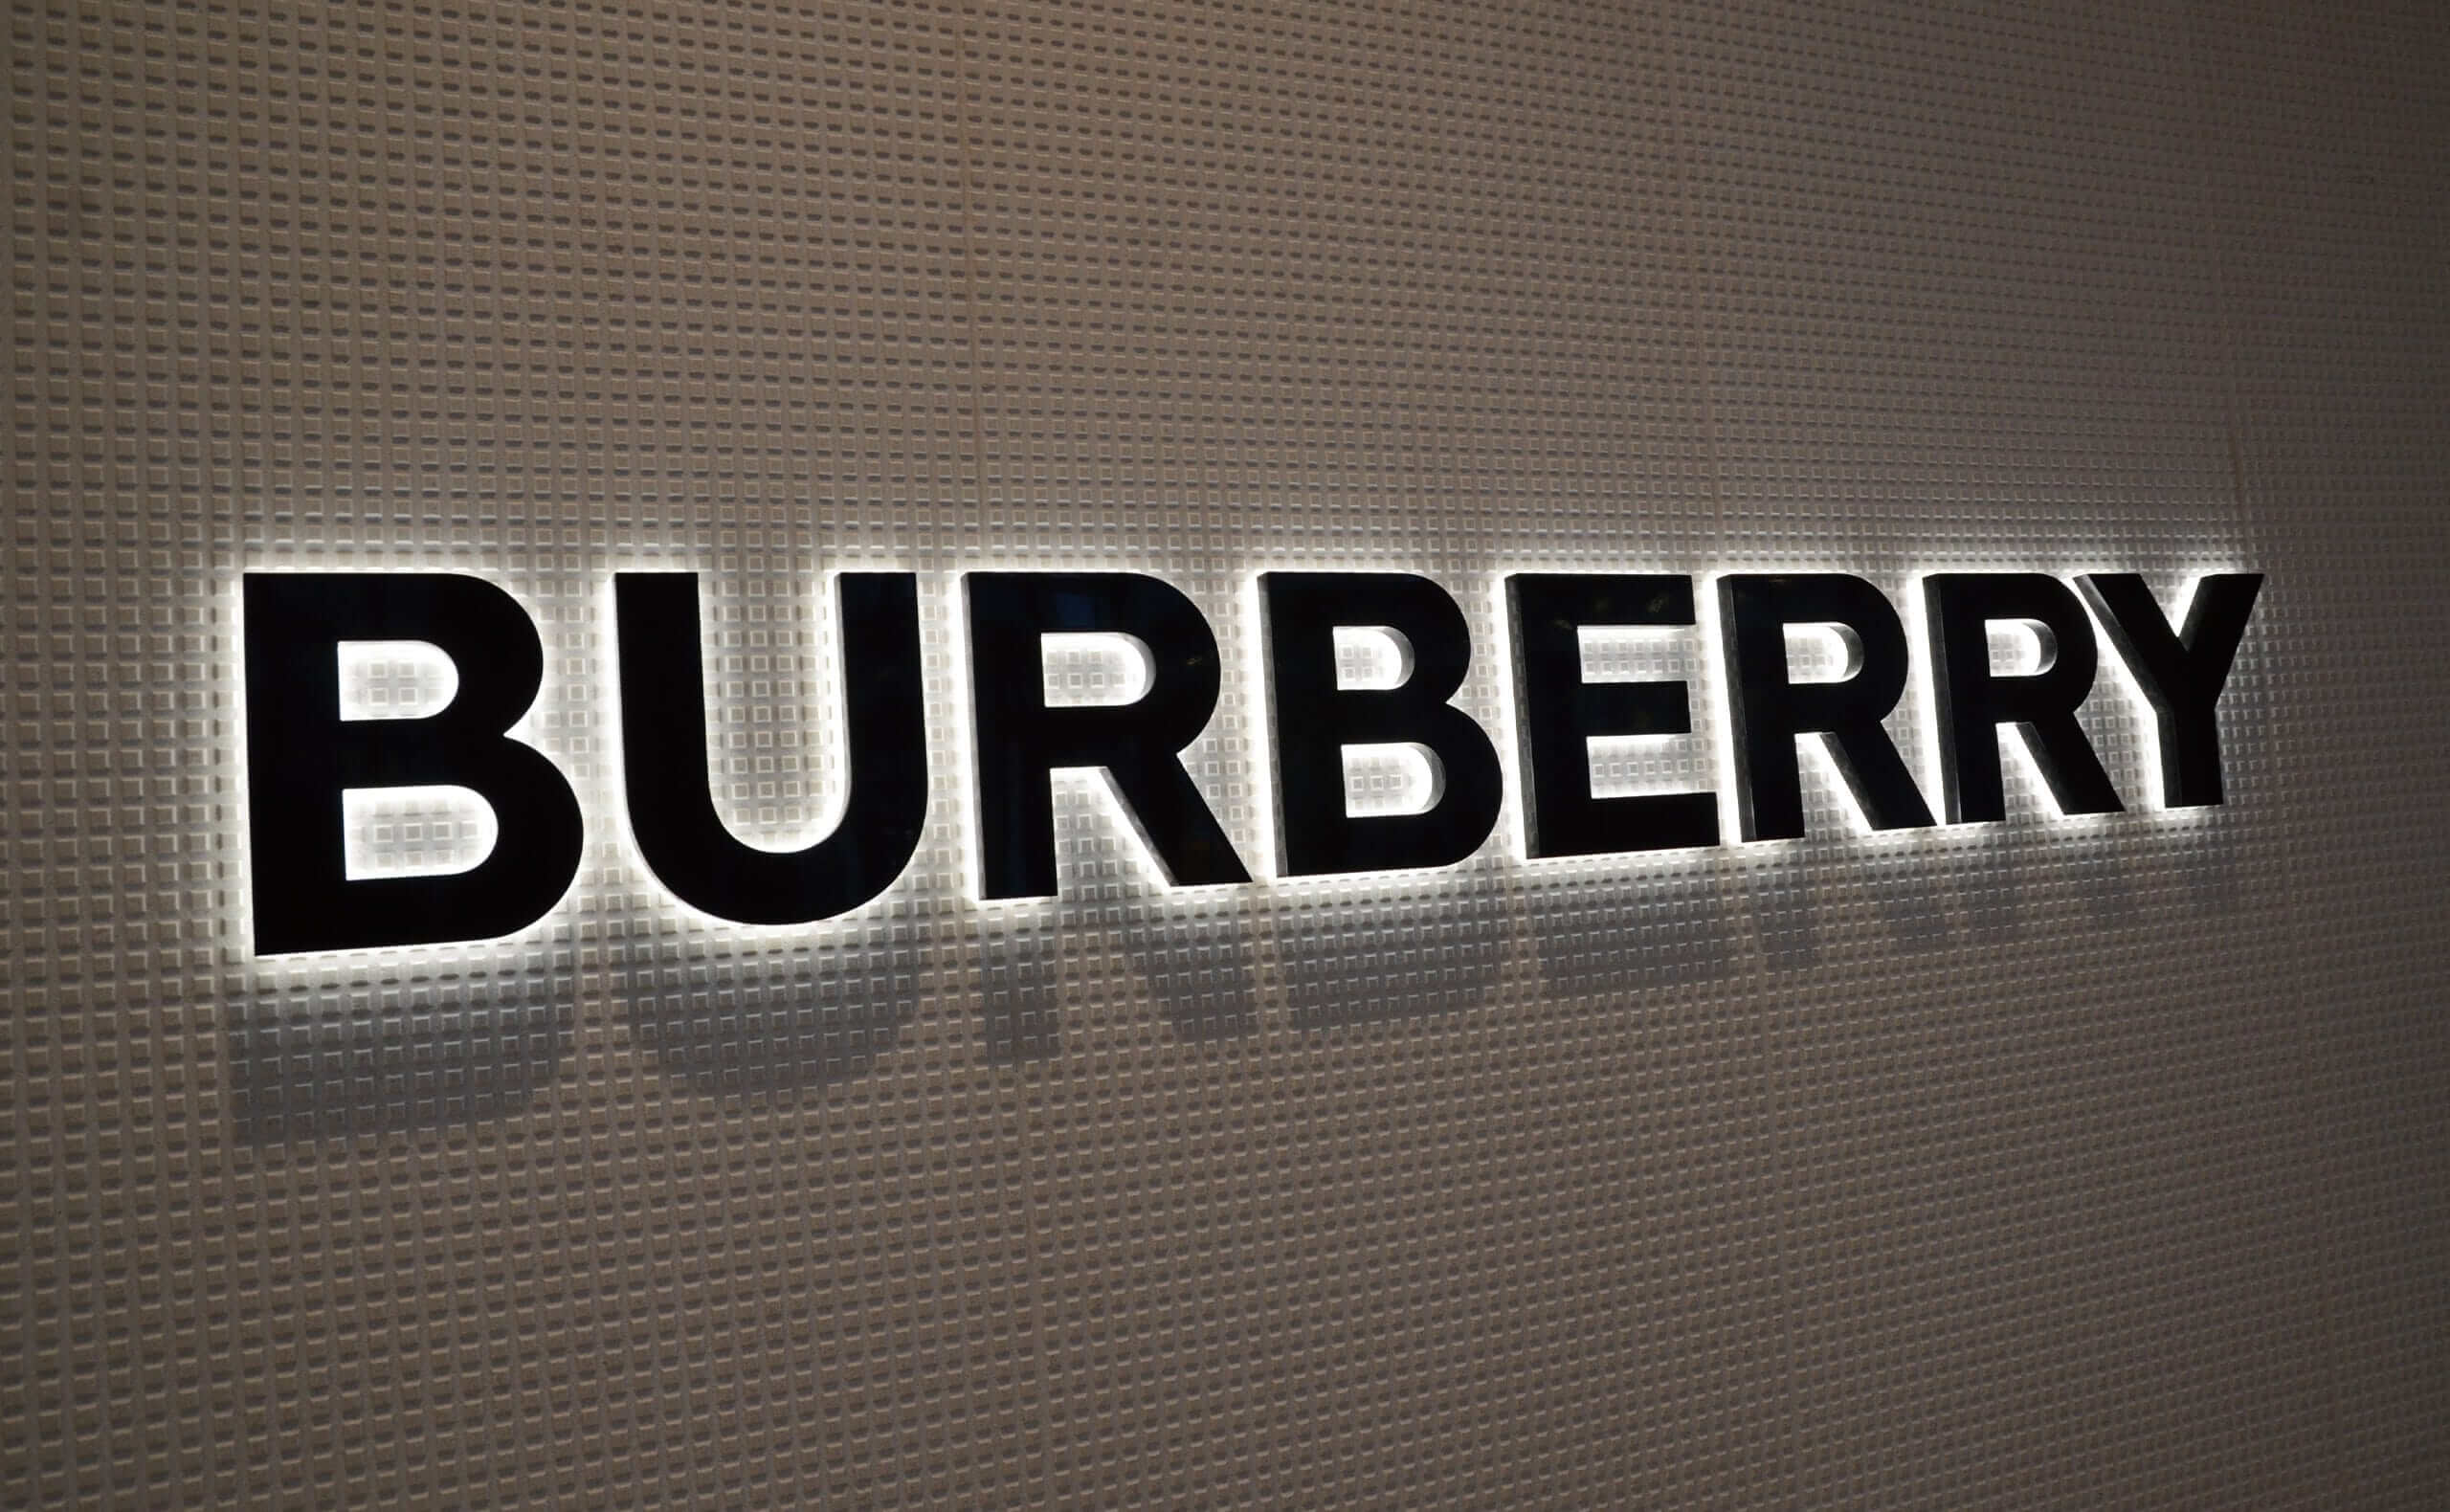 Backlit Channel Letters for Burberry